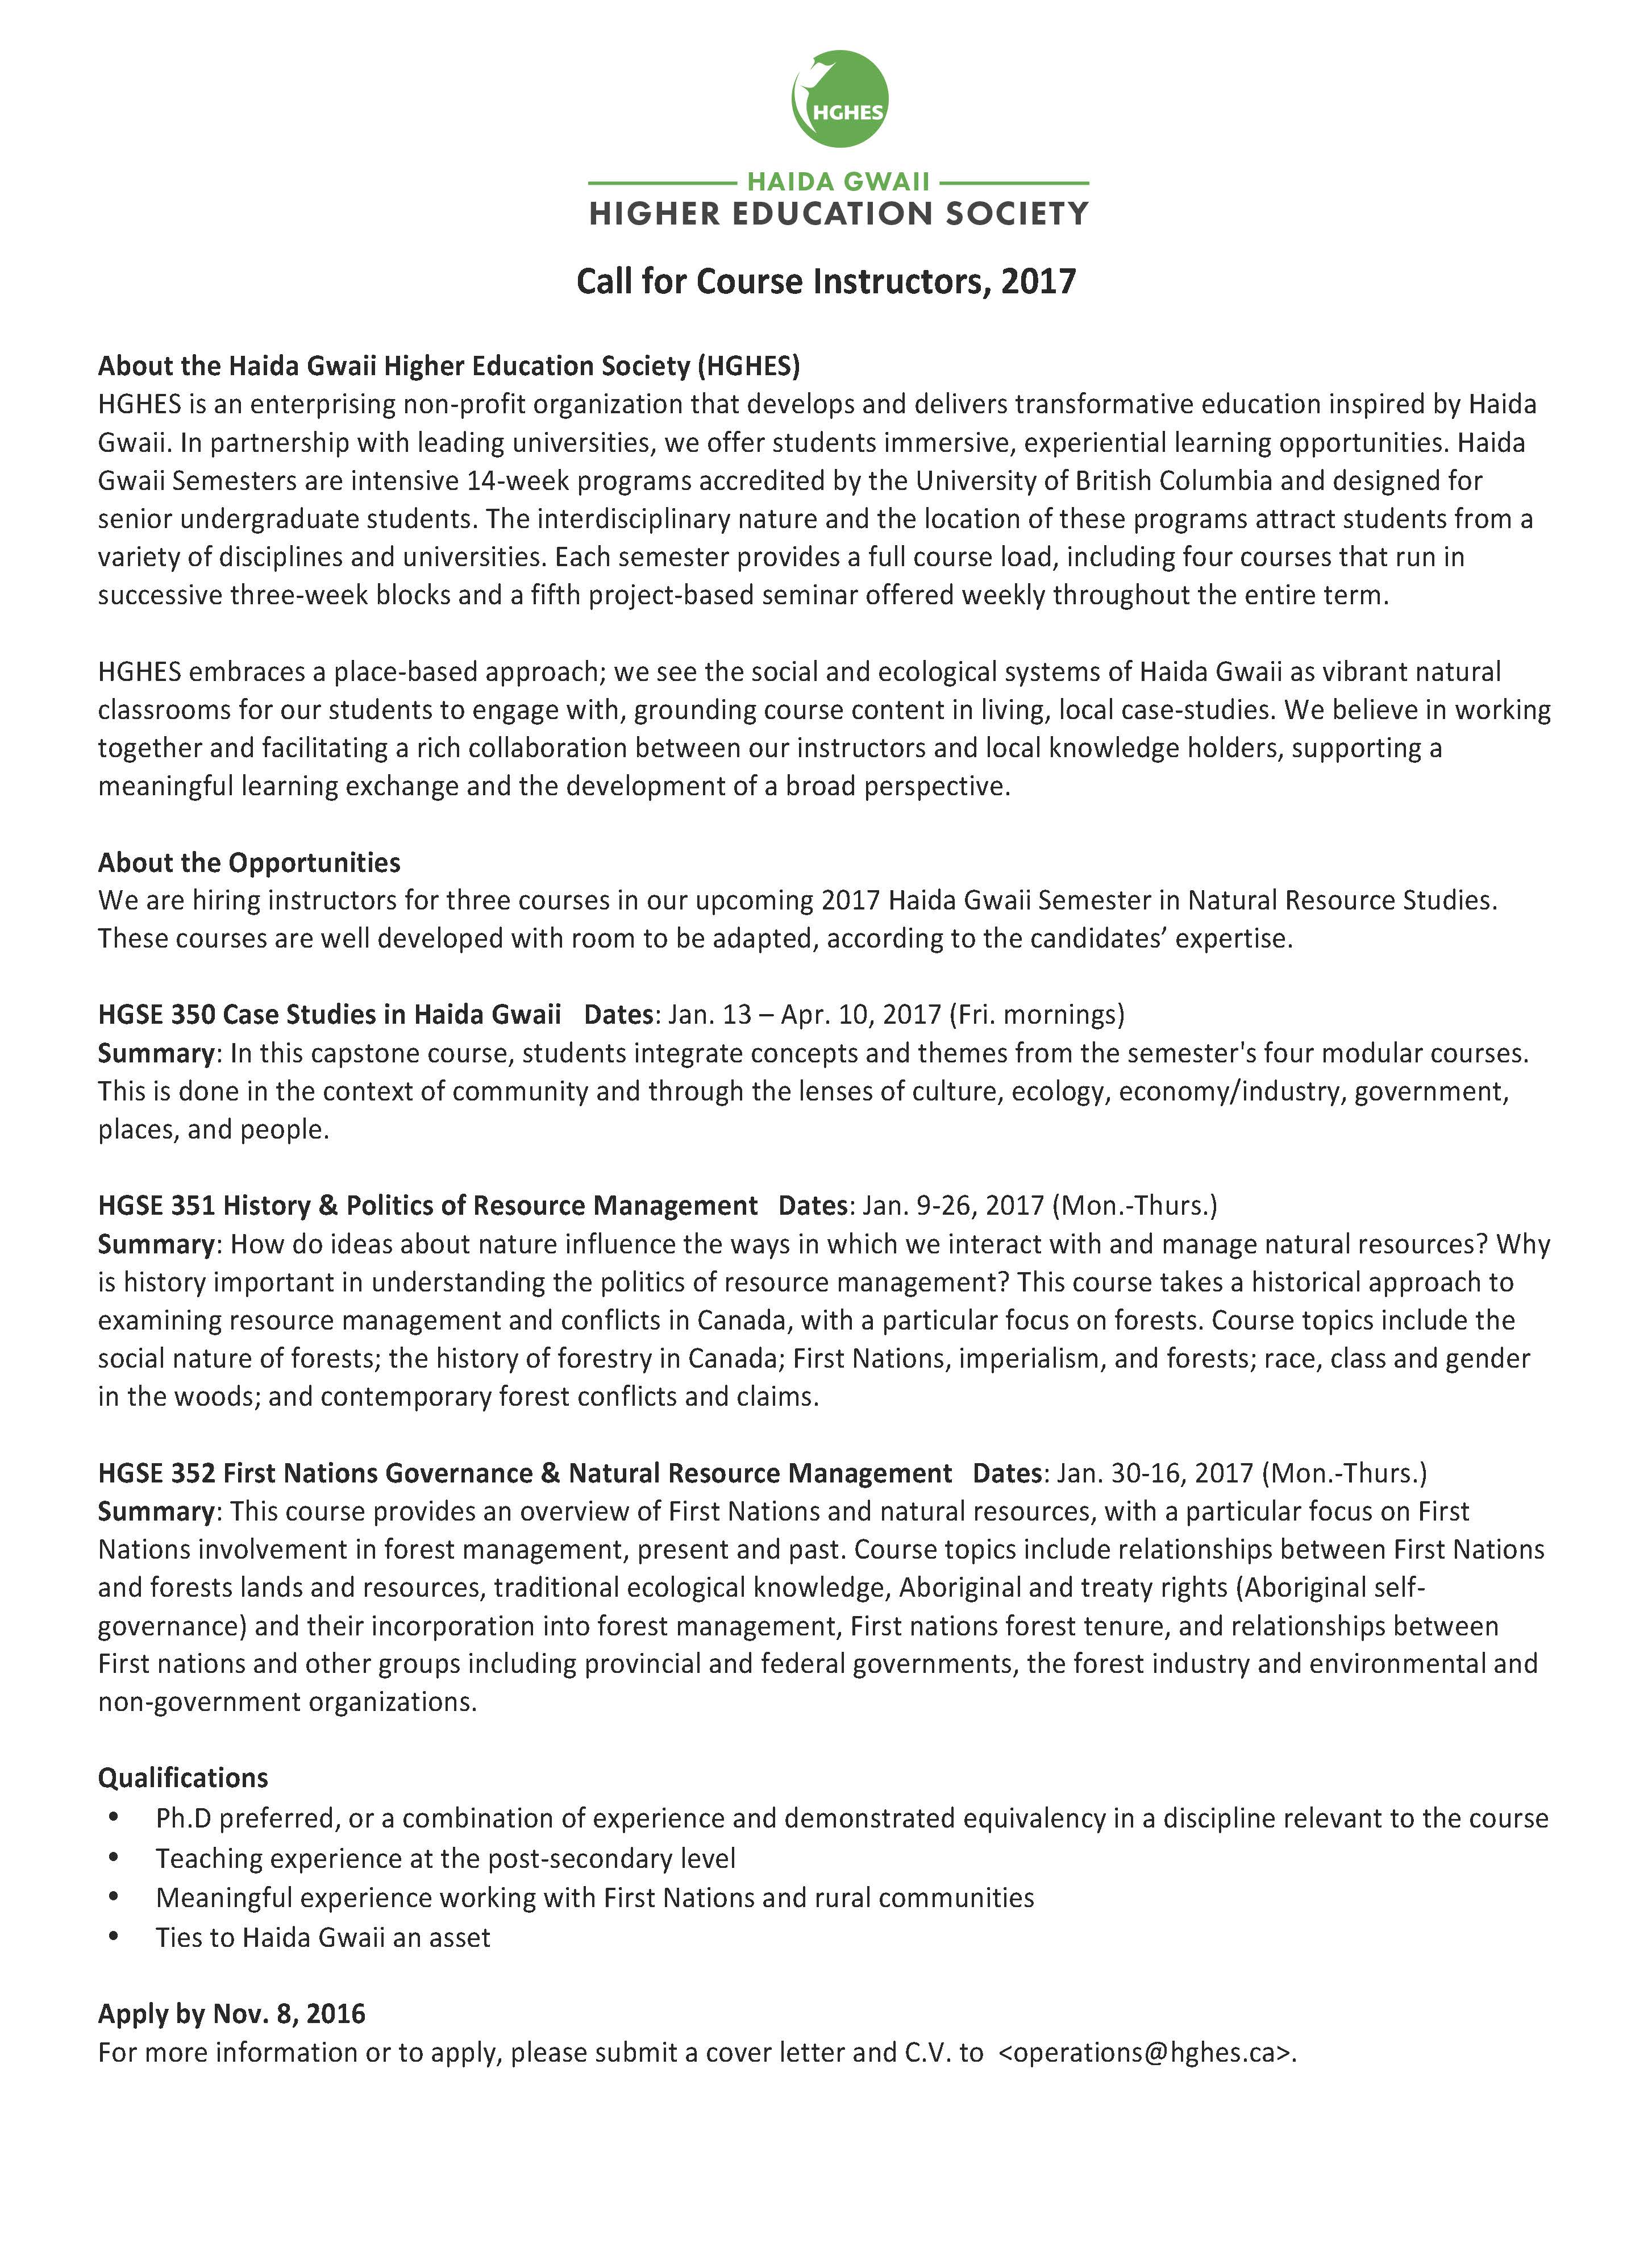 Higher Education Cover Letter from hghes.ca